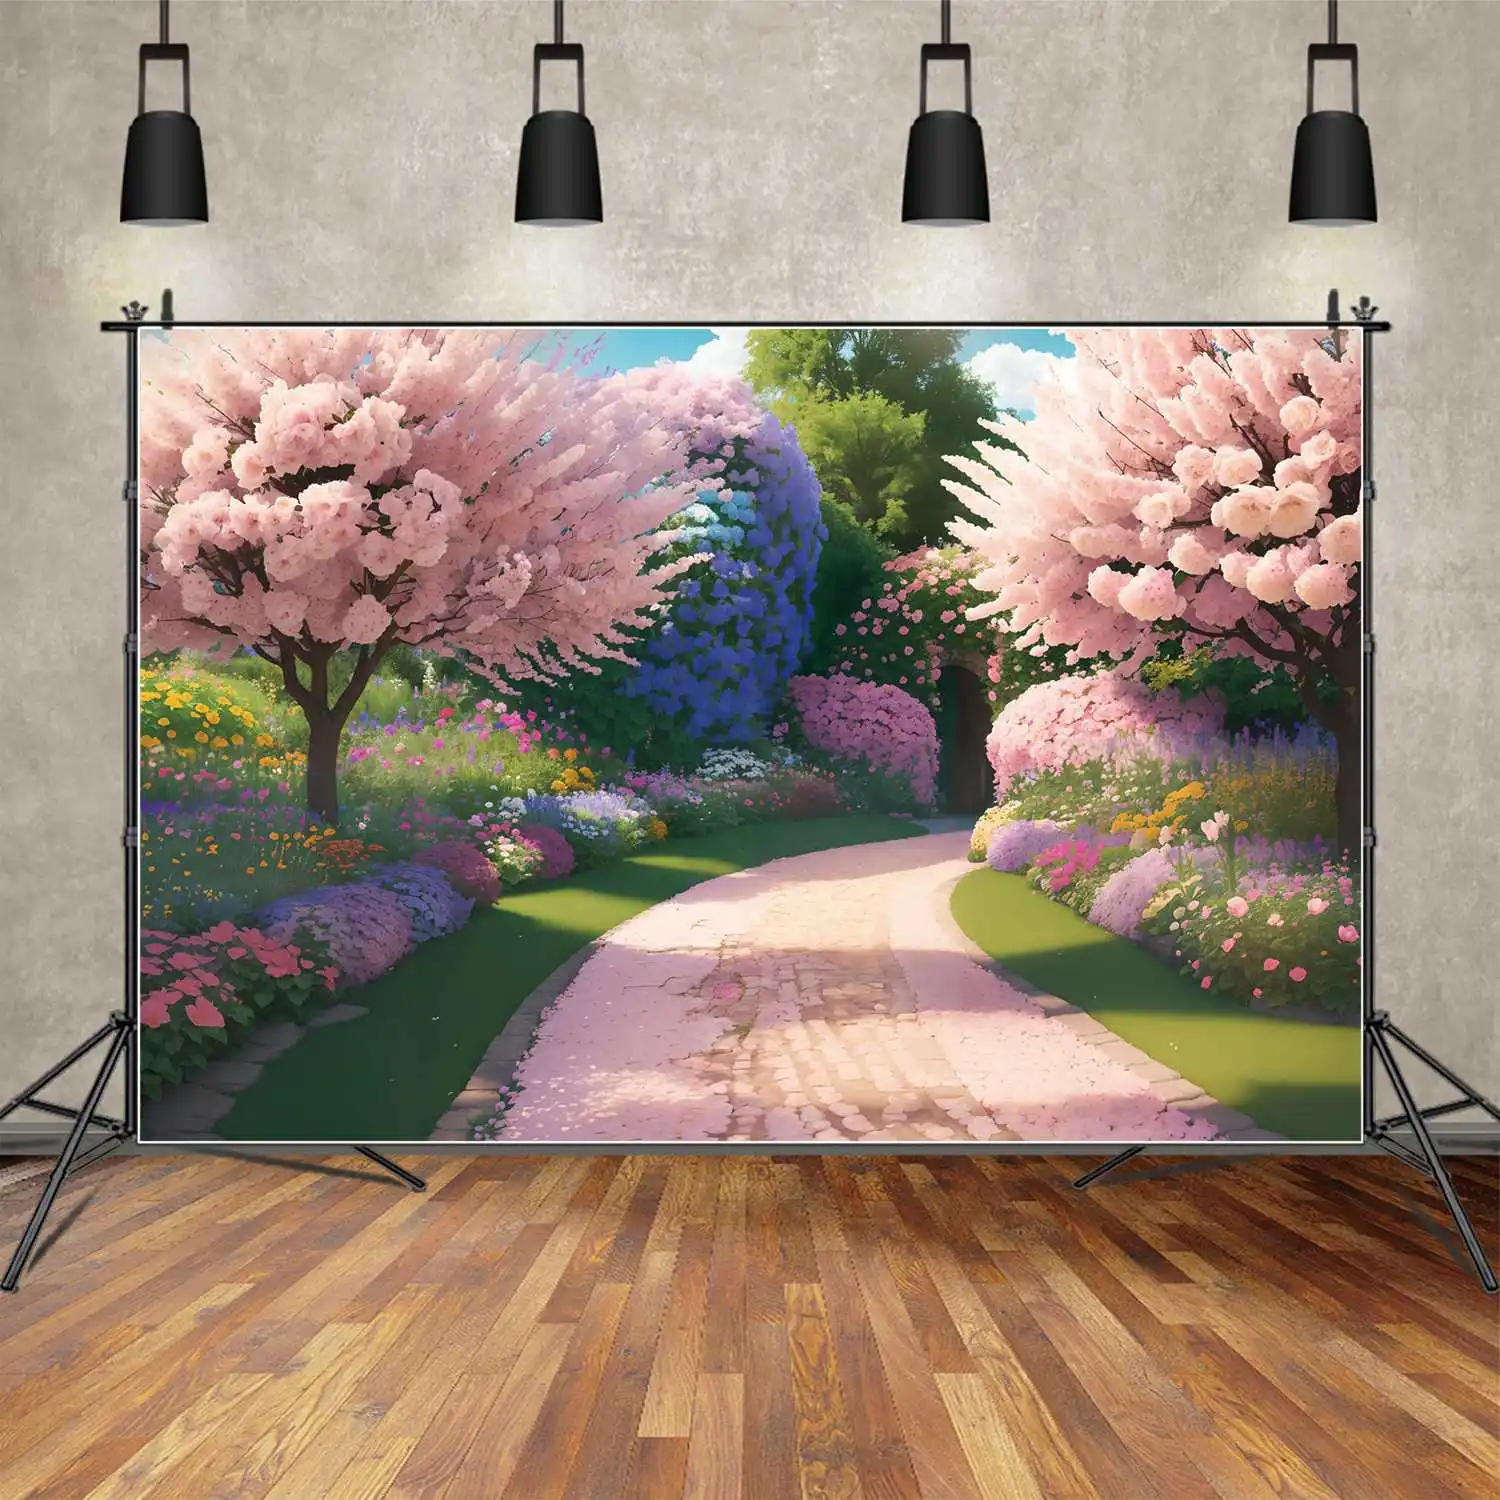 

Blue And Pink Spring Garden Photography Backdrops Decor Blossom Green Grass Custom Kids Photo Booth Photo Backgrounds Banners